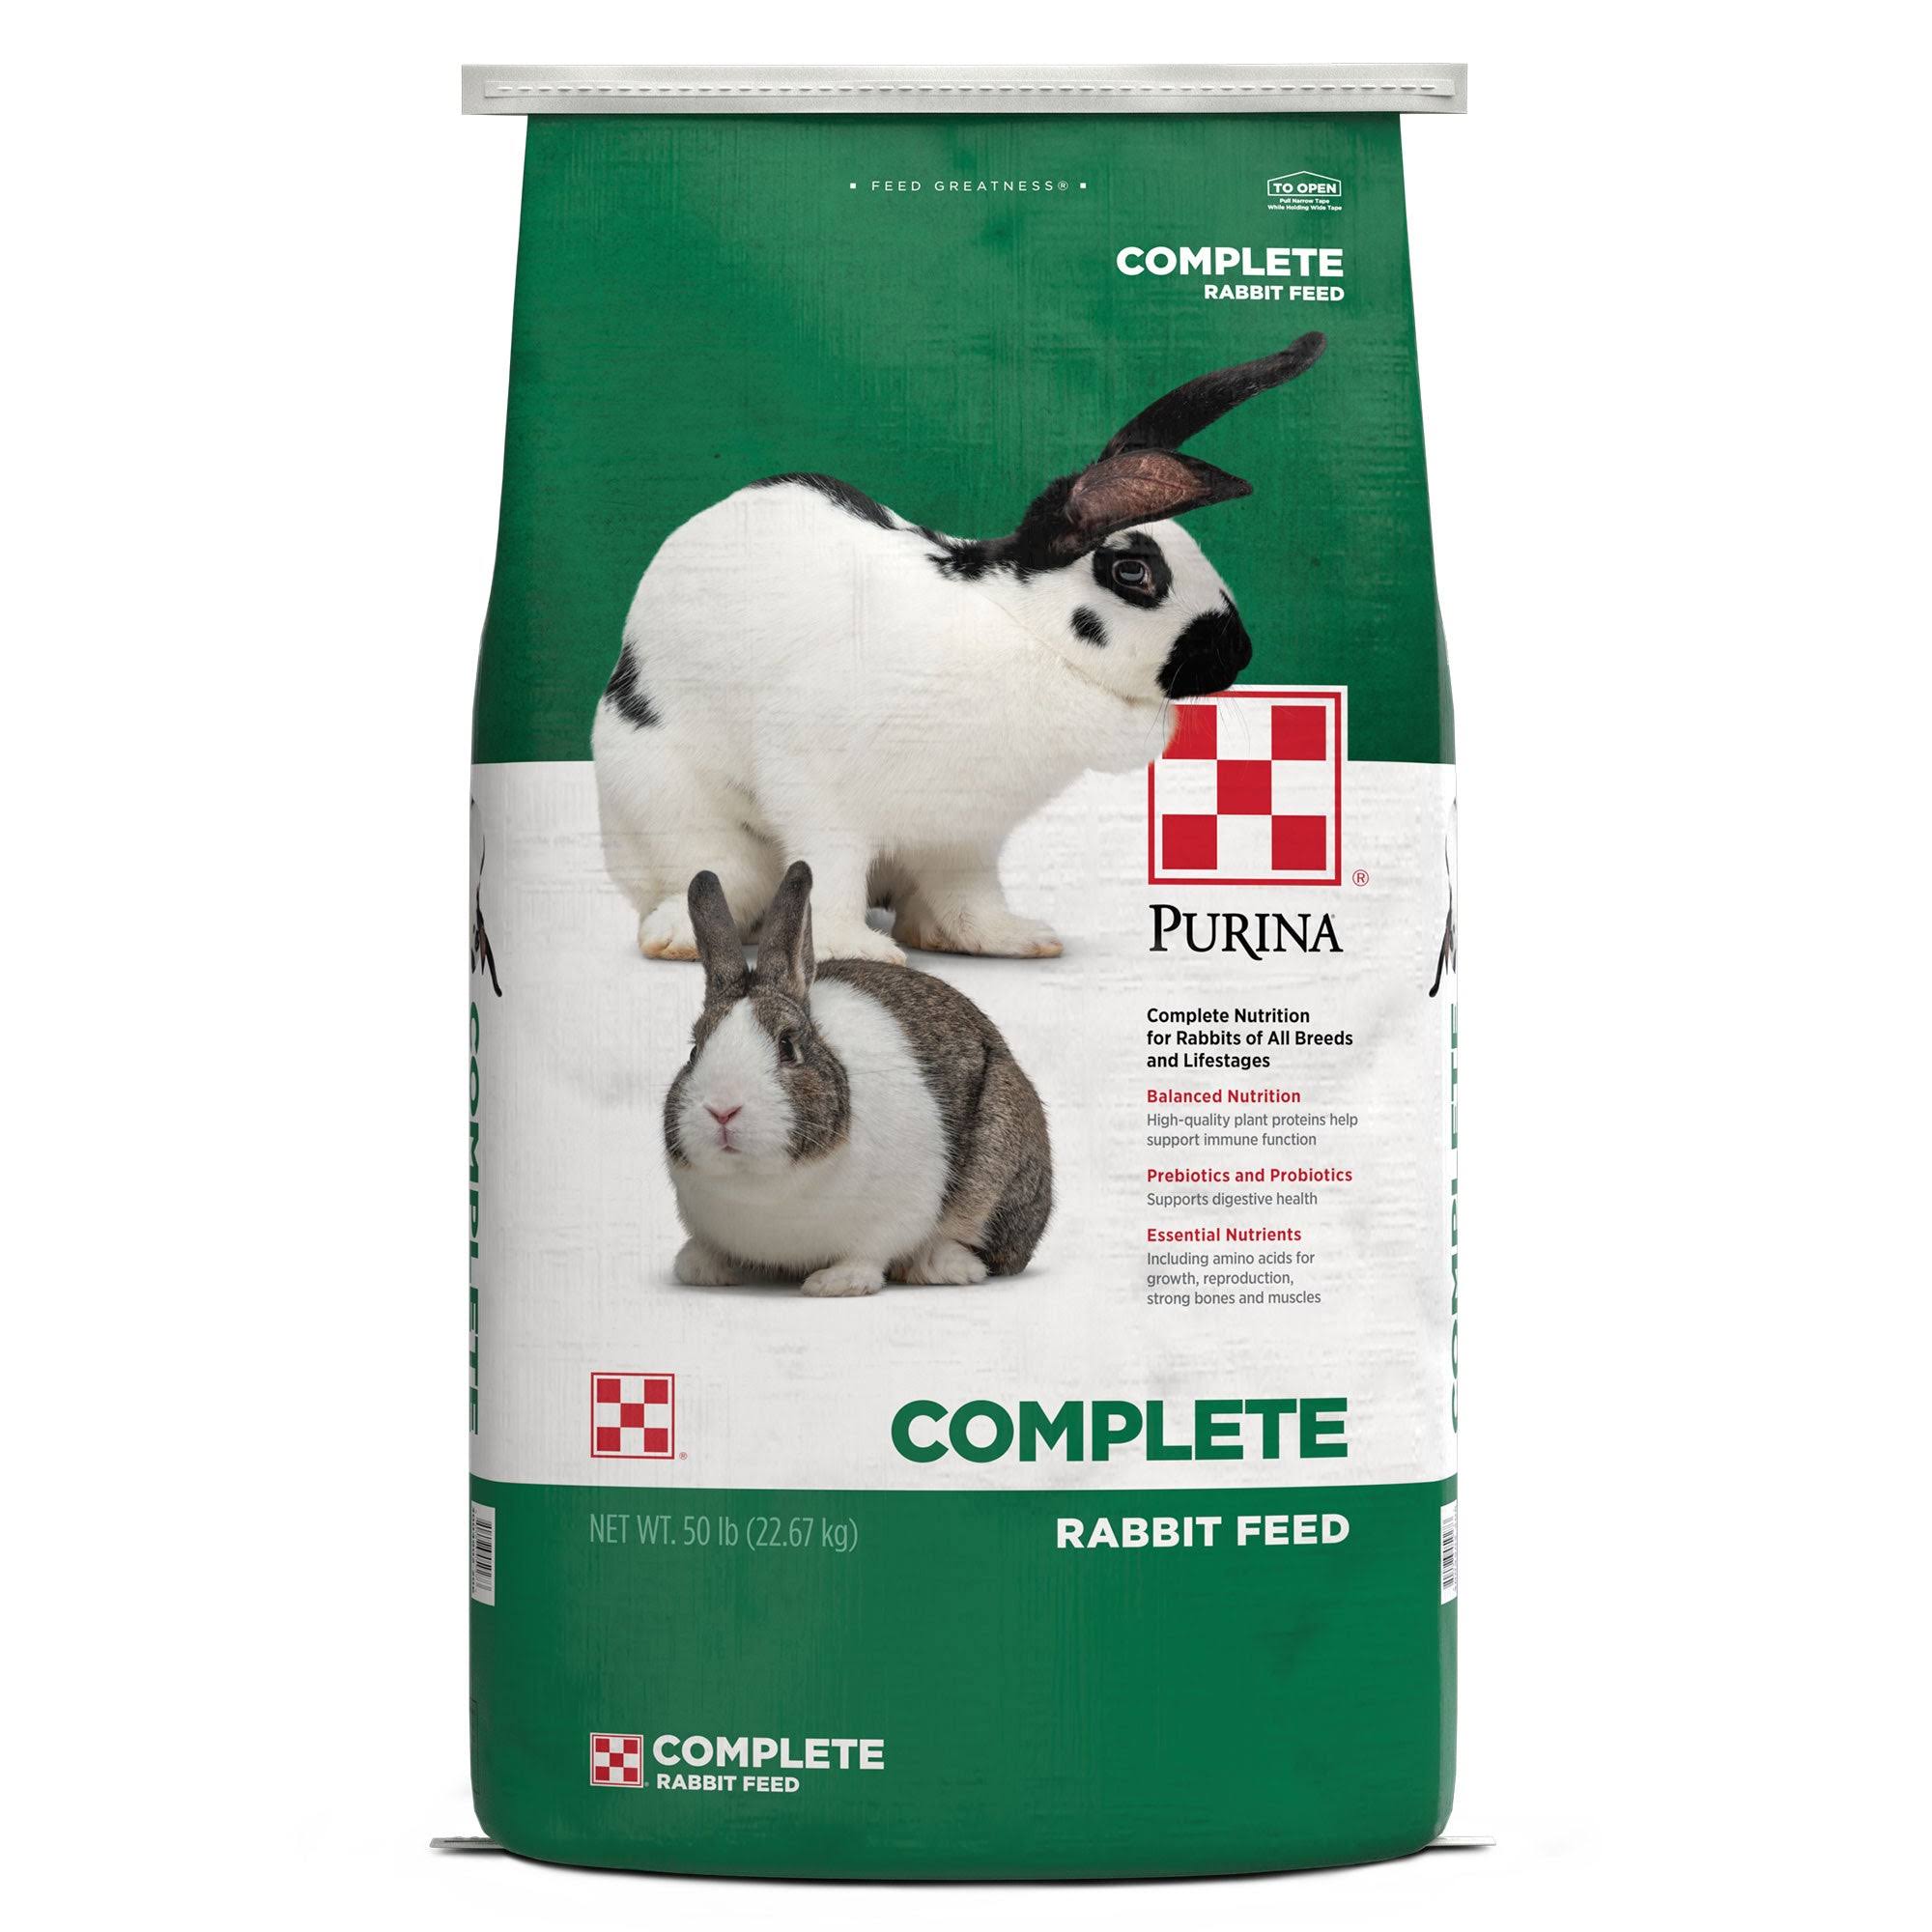 Purina Complete Rabbit Feed Pellets